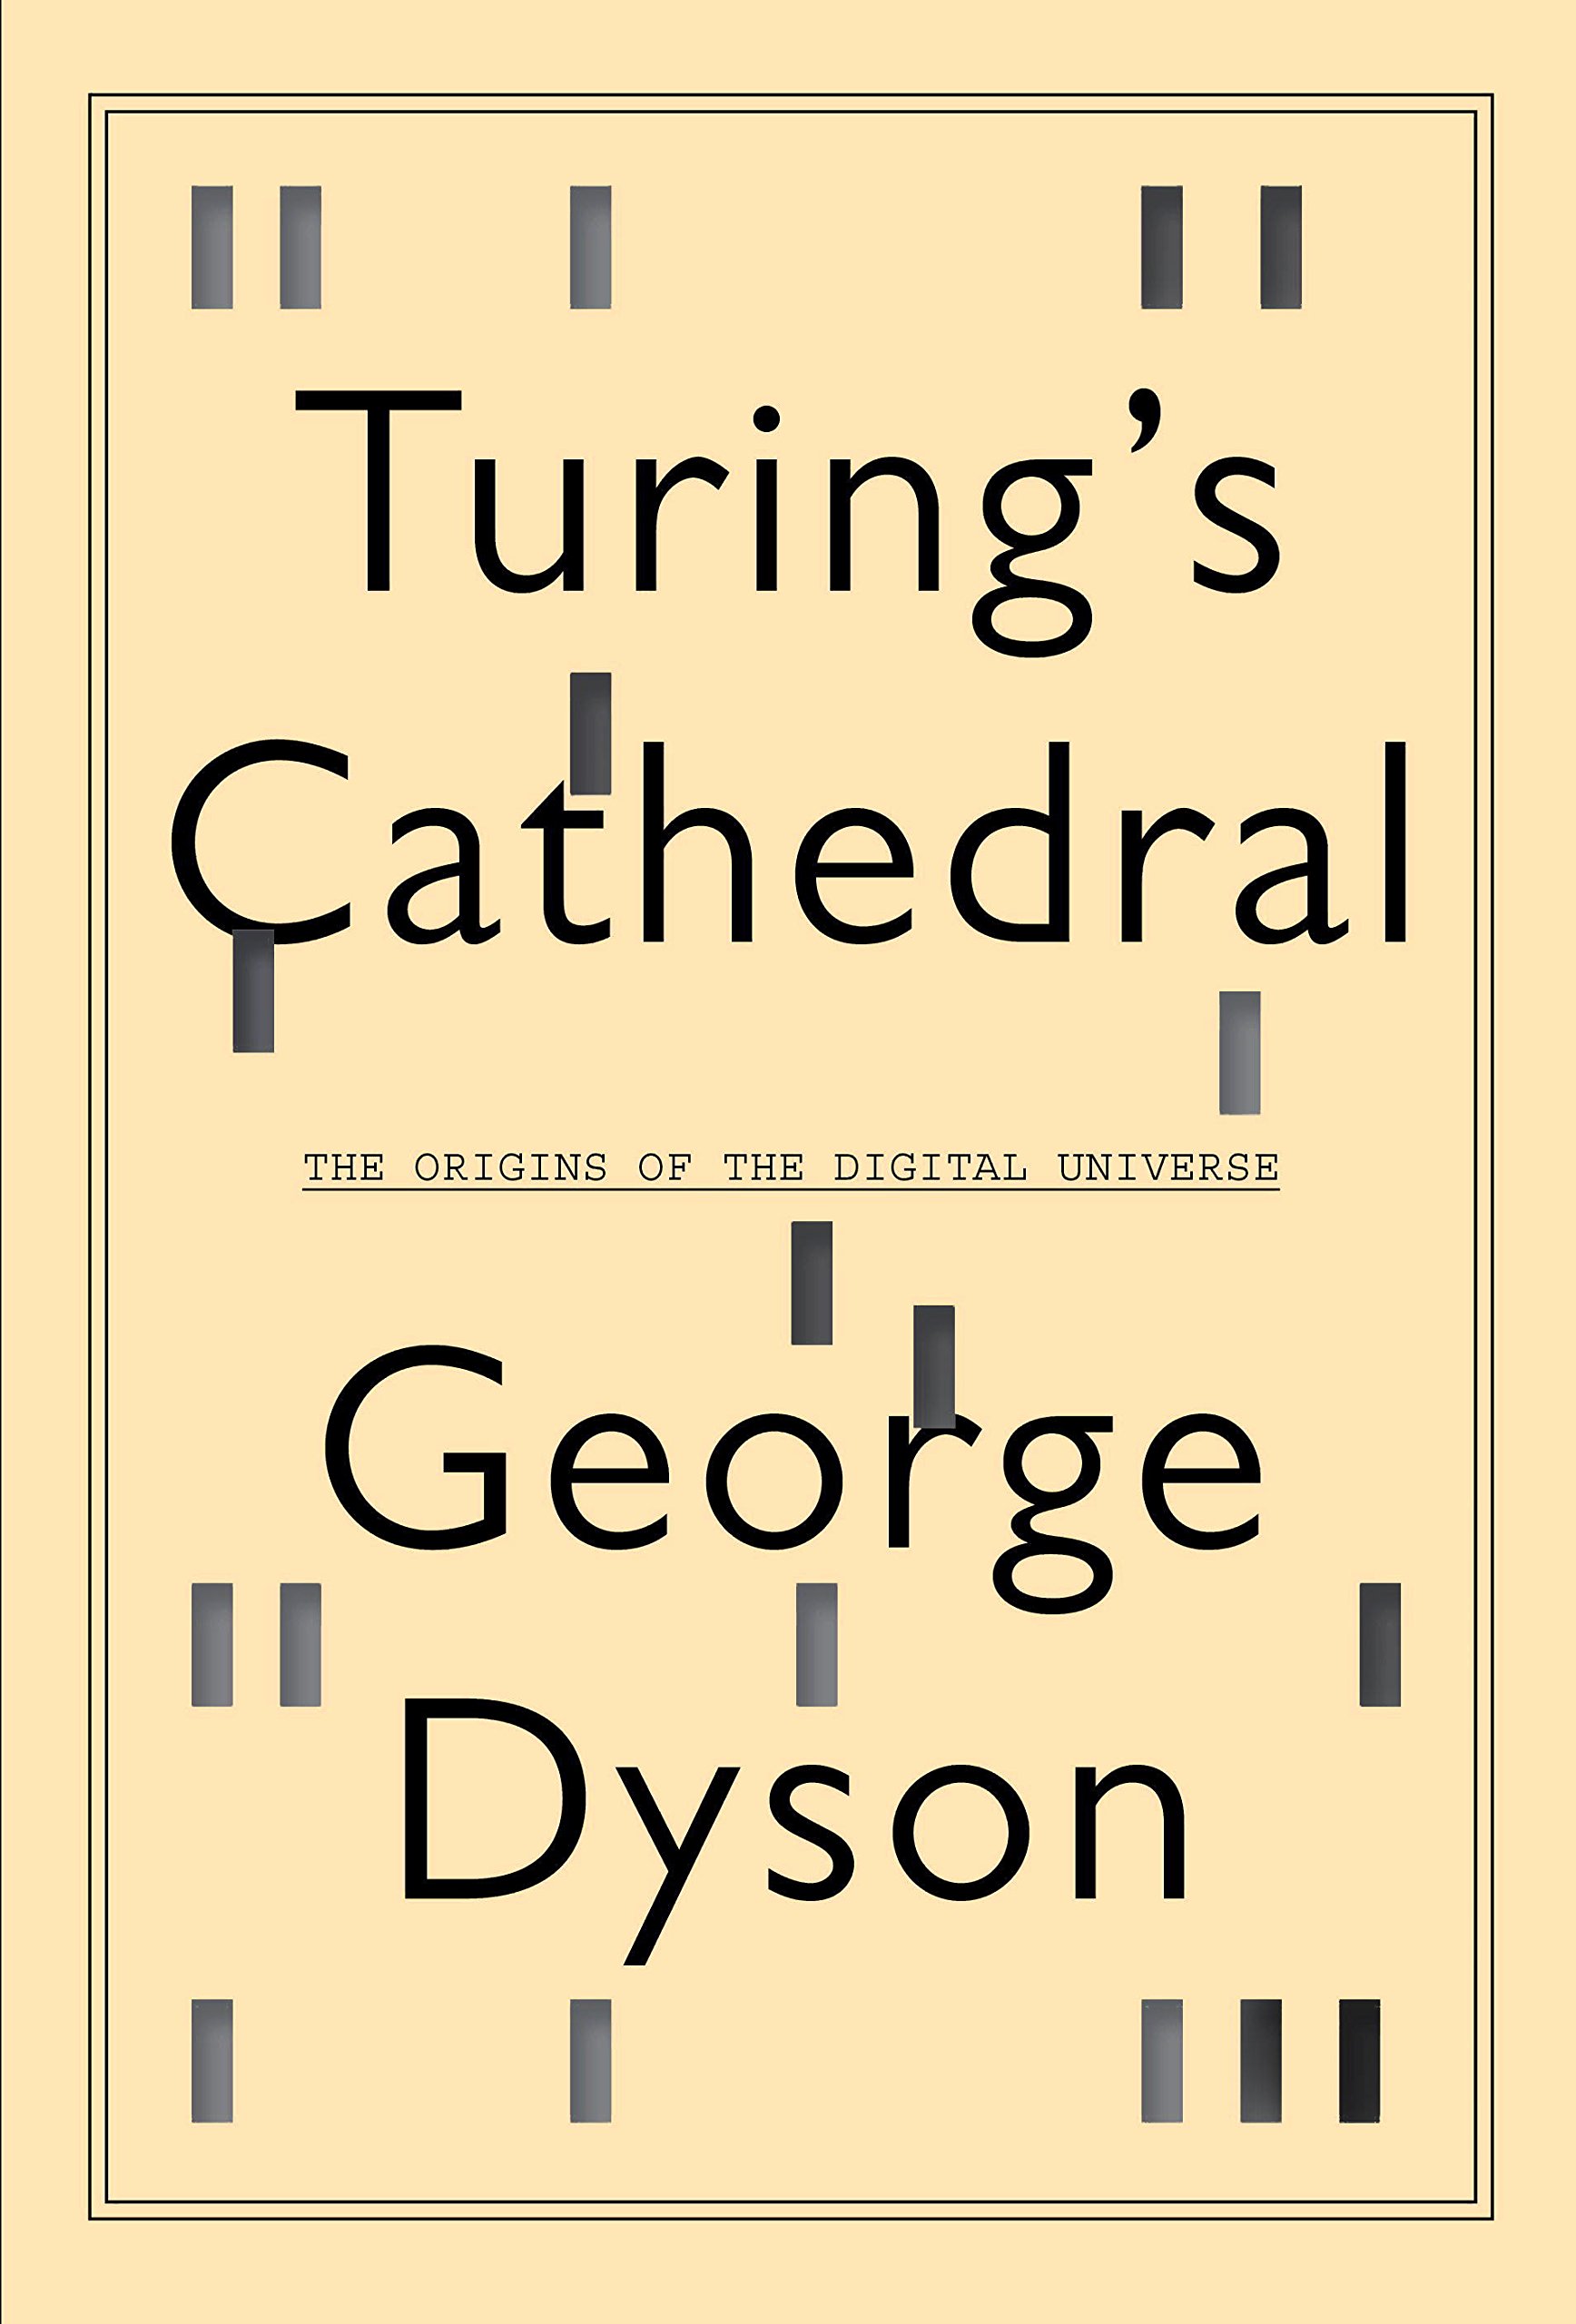 Turing's Cathedral book cover